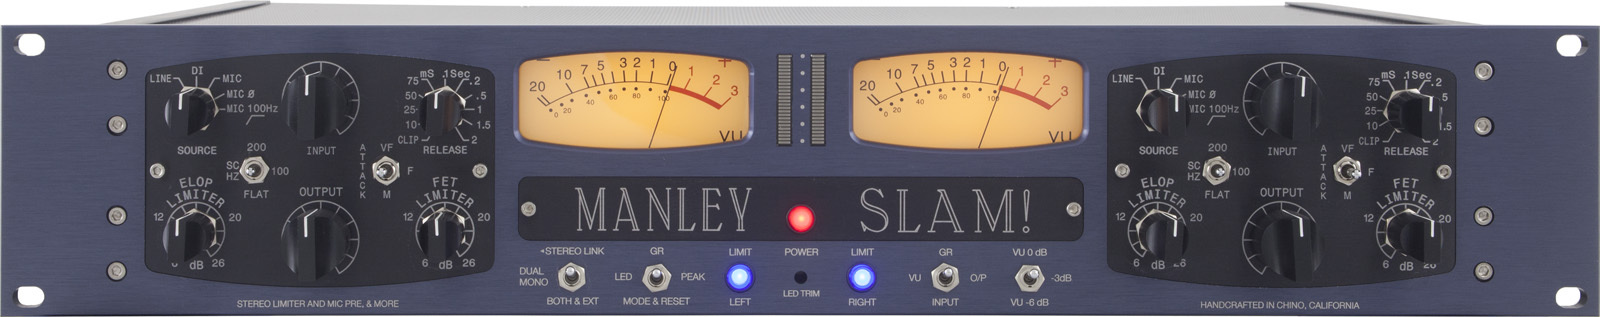 Manley Slam - Preamp - Main picture